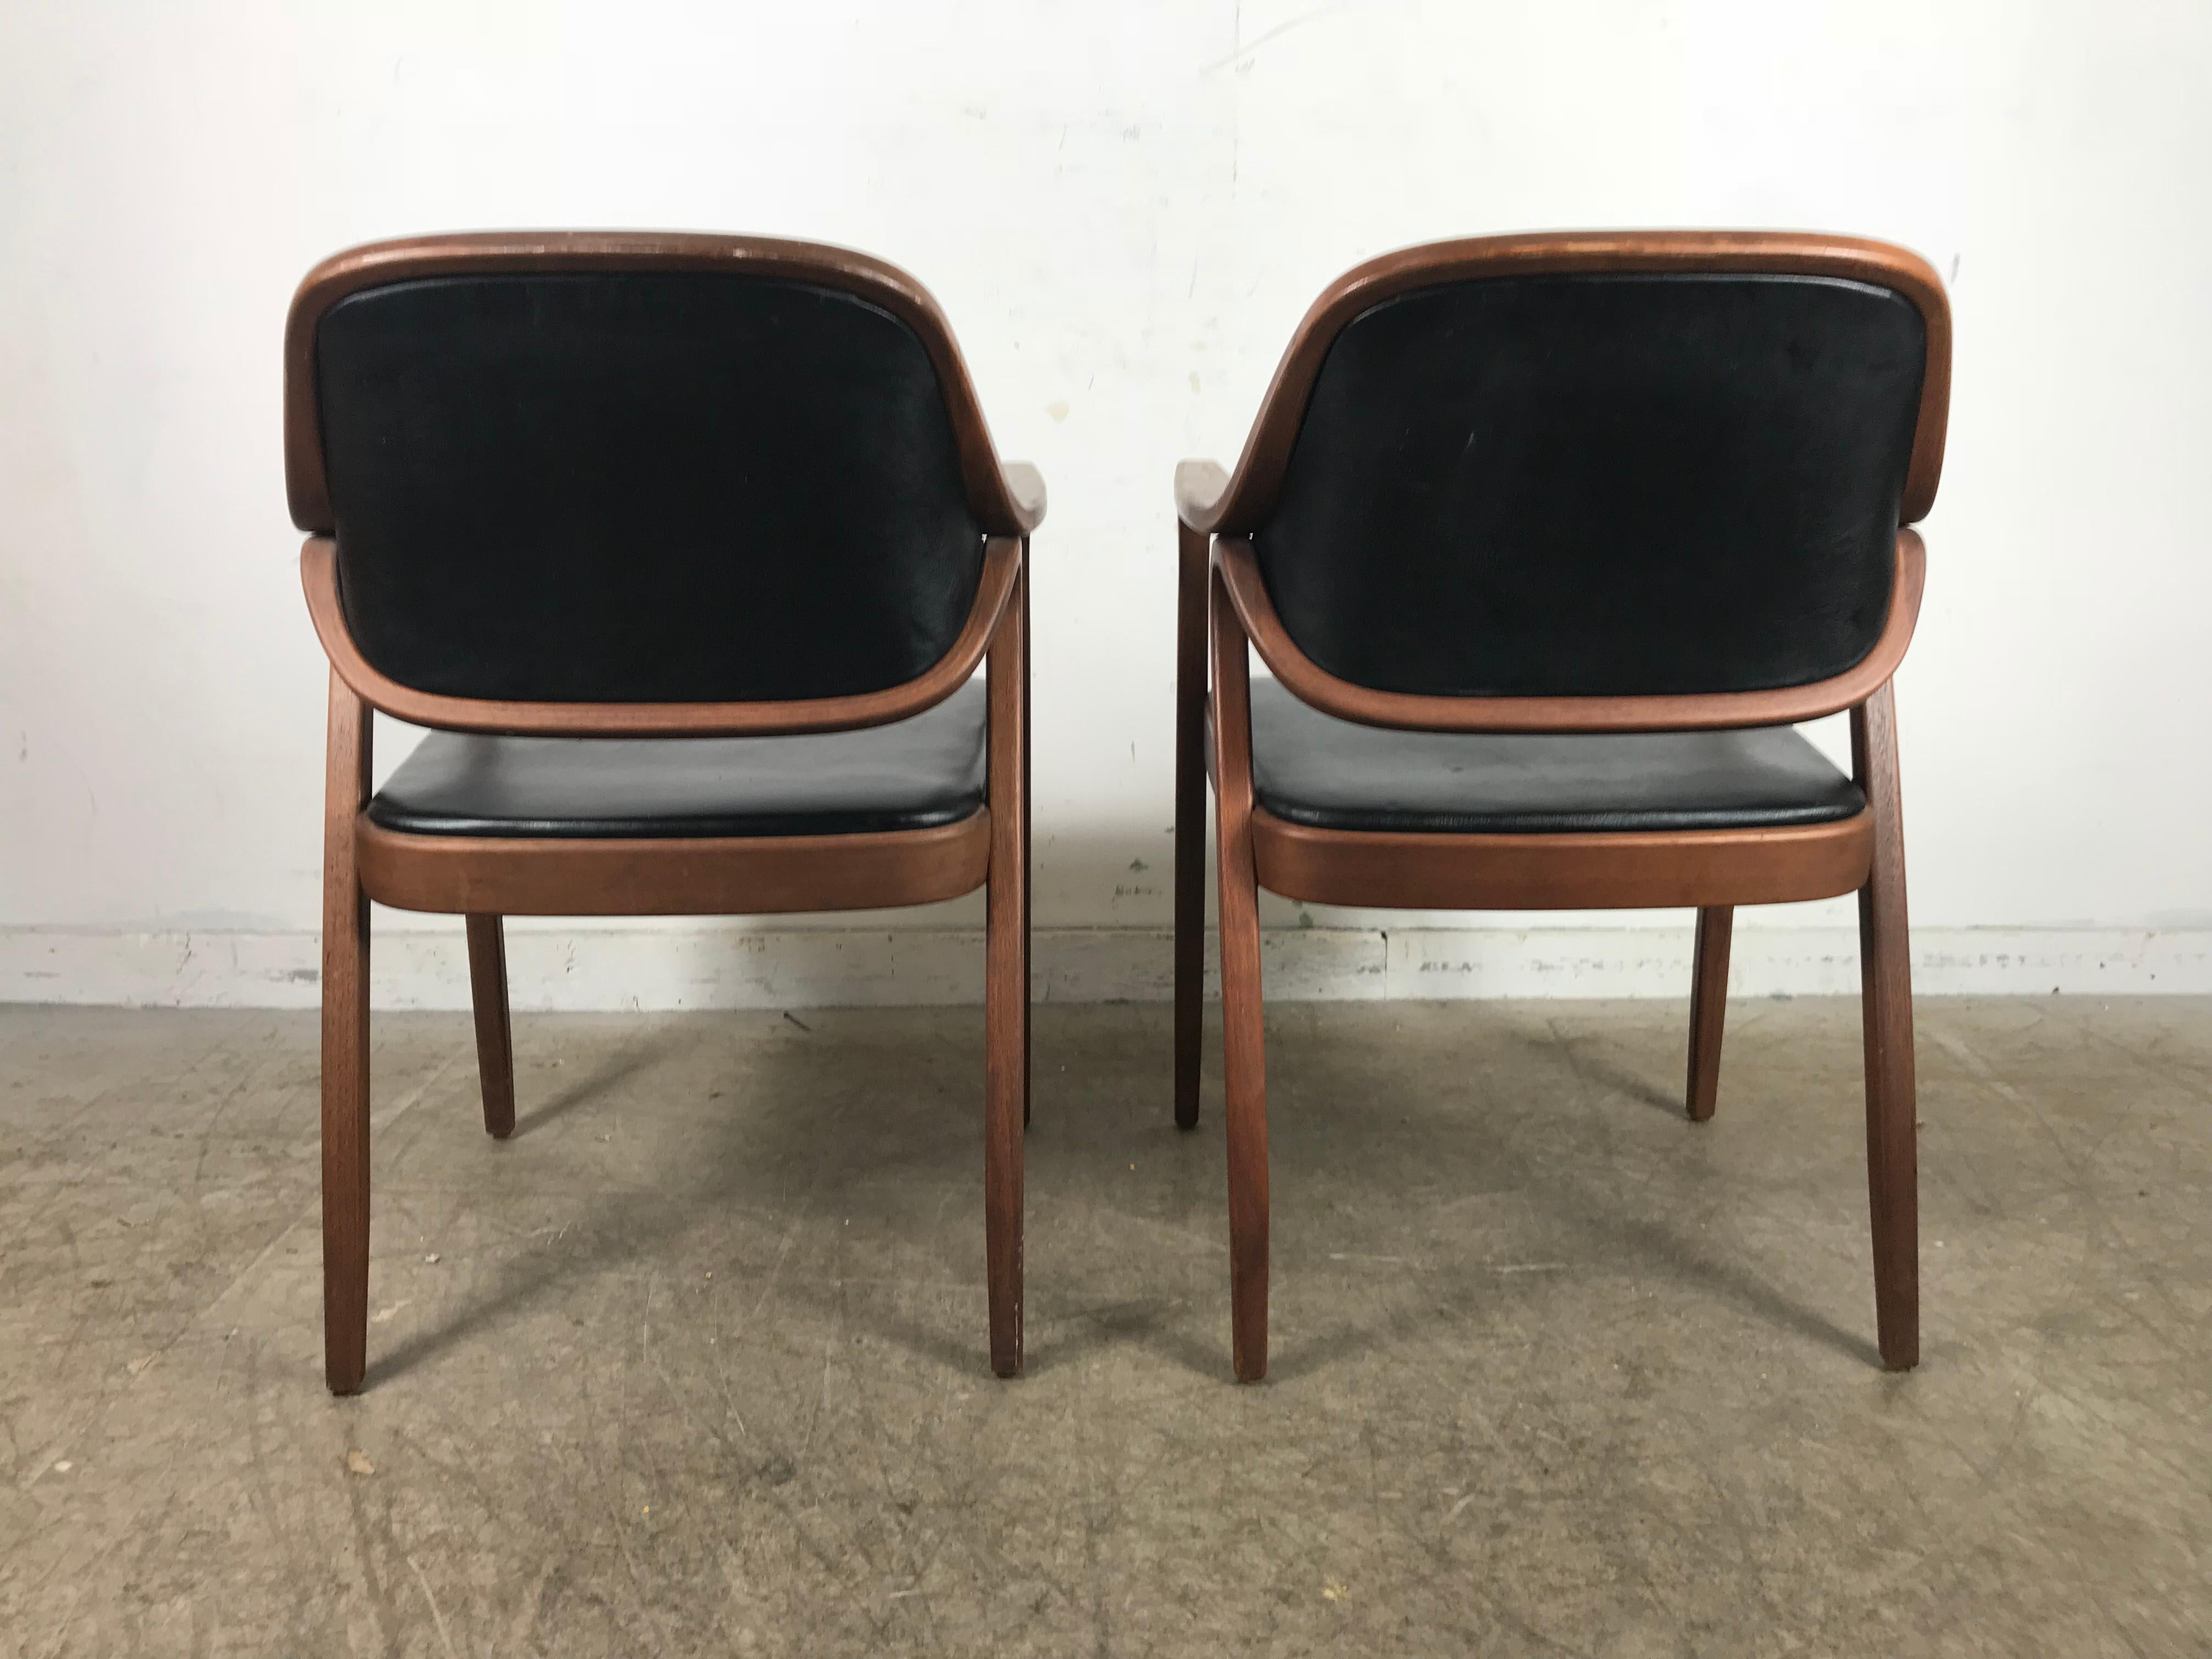 20th Century Pair of Modernist Bentwood Mahogany and Leather Chairs by Don Pettit for Knoll